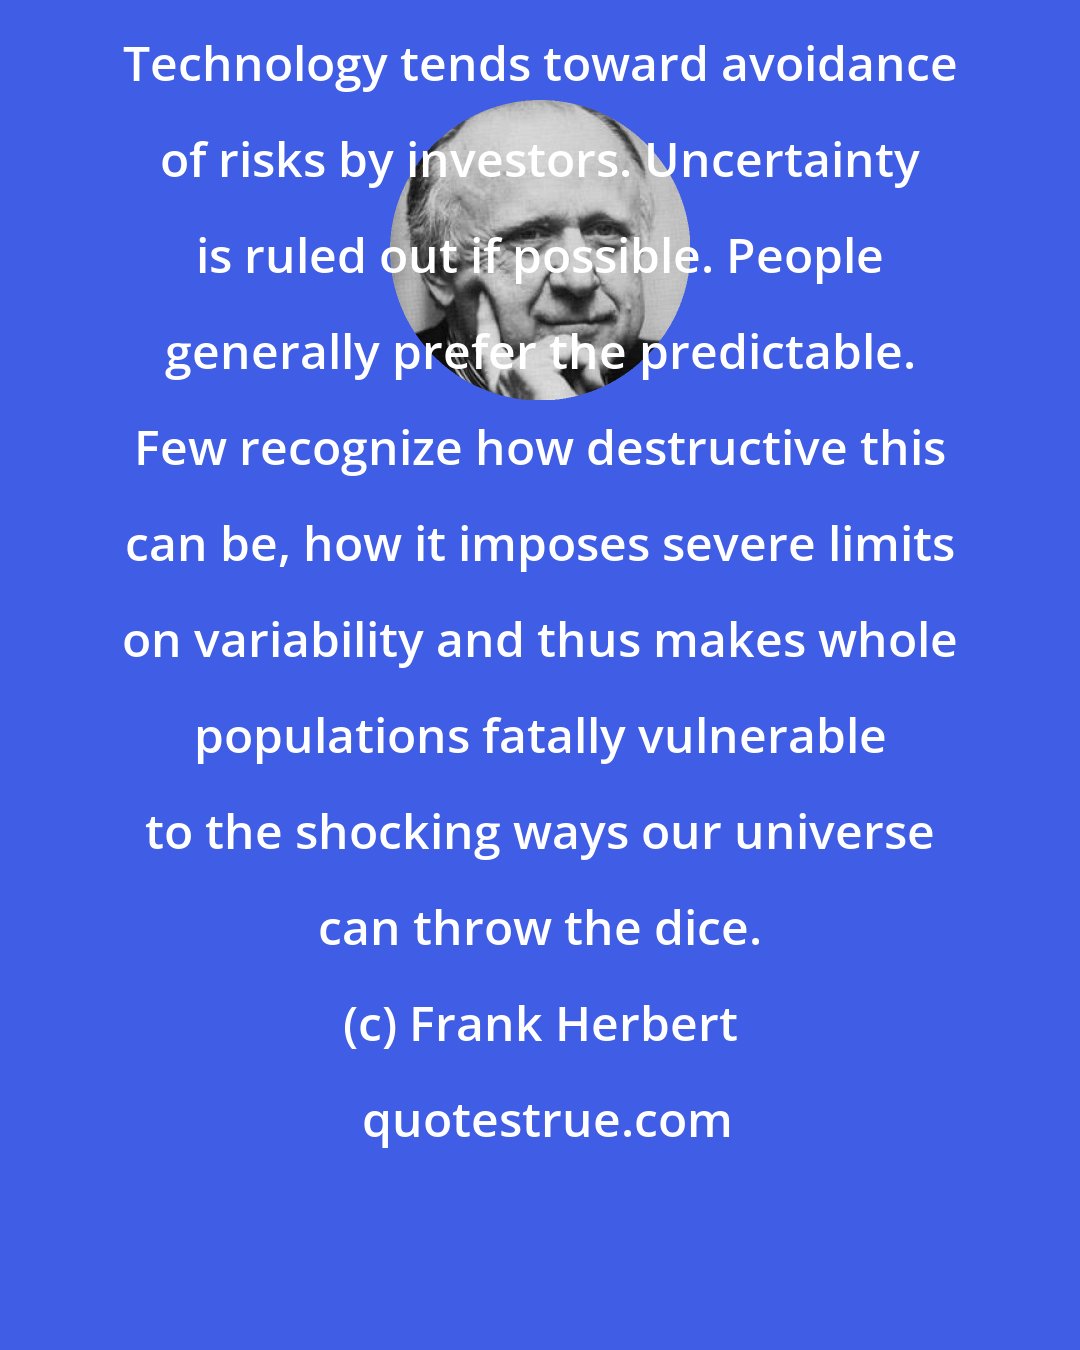 Frank Herbert: Technology tends toward avoidance of risks by investors. Uncertainty is ruled out if possible. People generally prefer the predictable. Few recognize how destructive this can be, how it imposes severe limits on variability and thus makes whole populations fatally vulnerable to the shocking ways our universe can throw the dice.